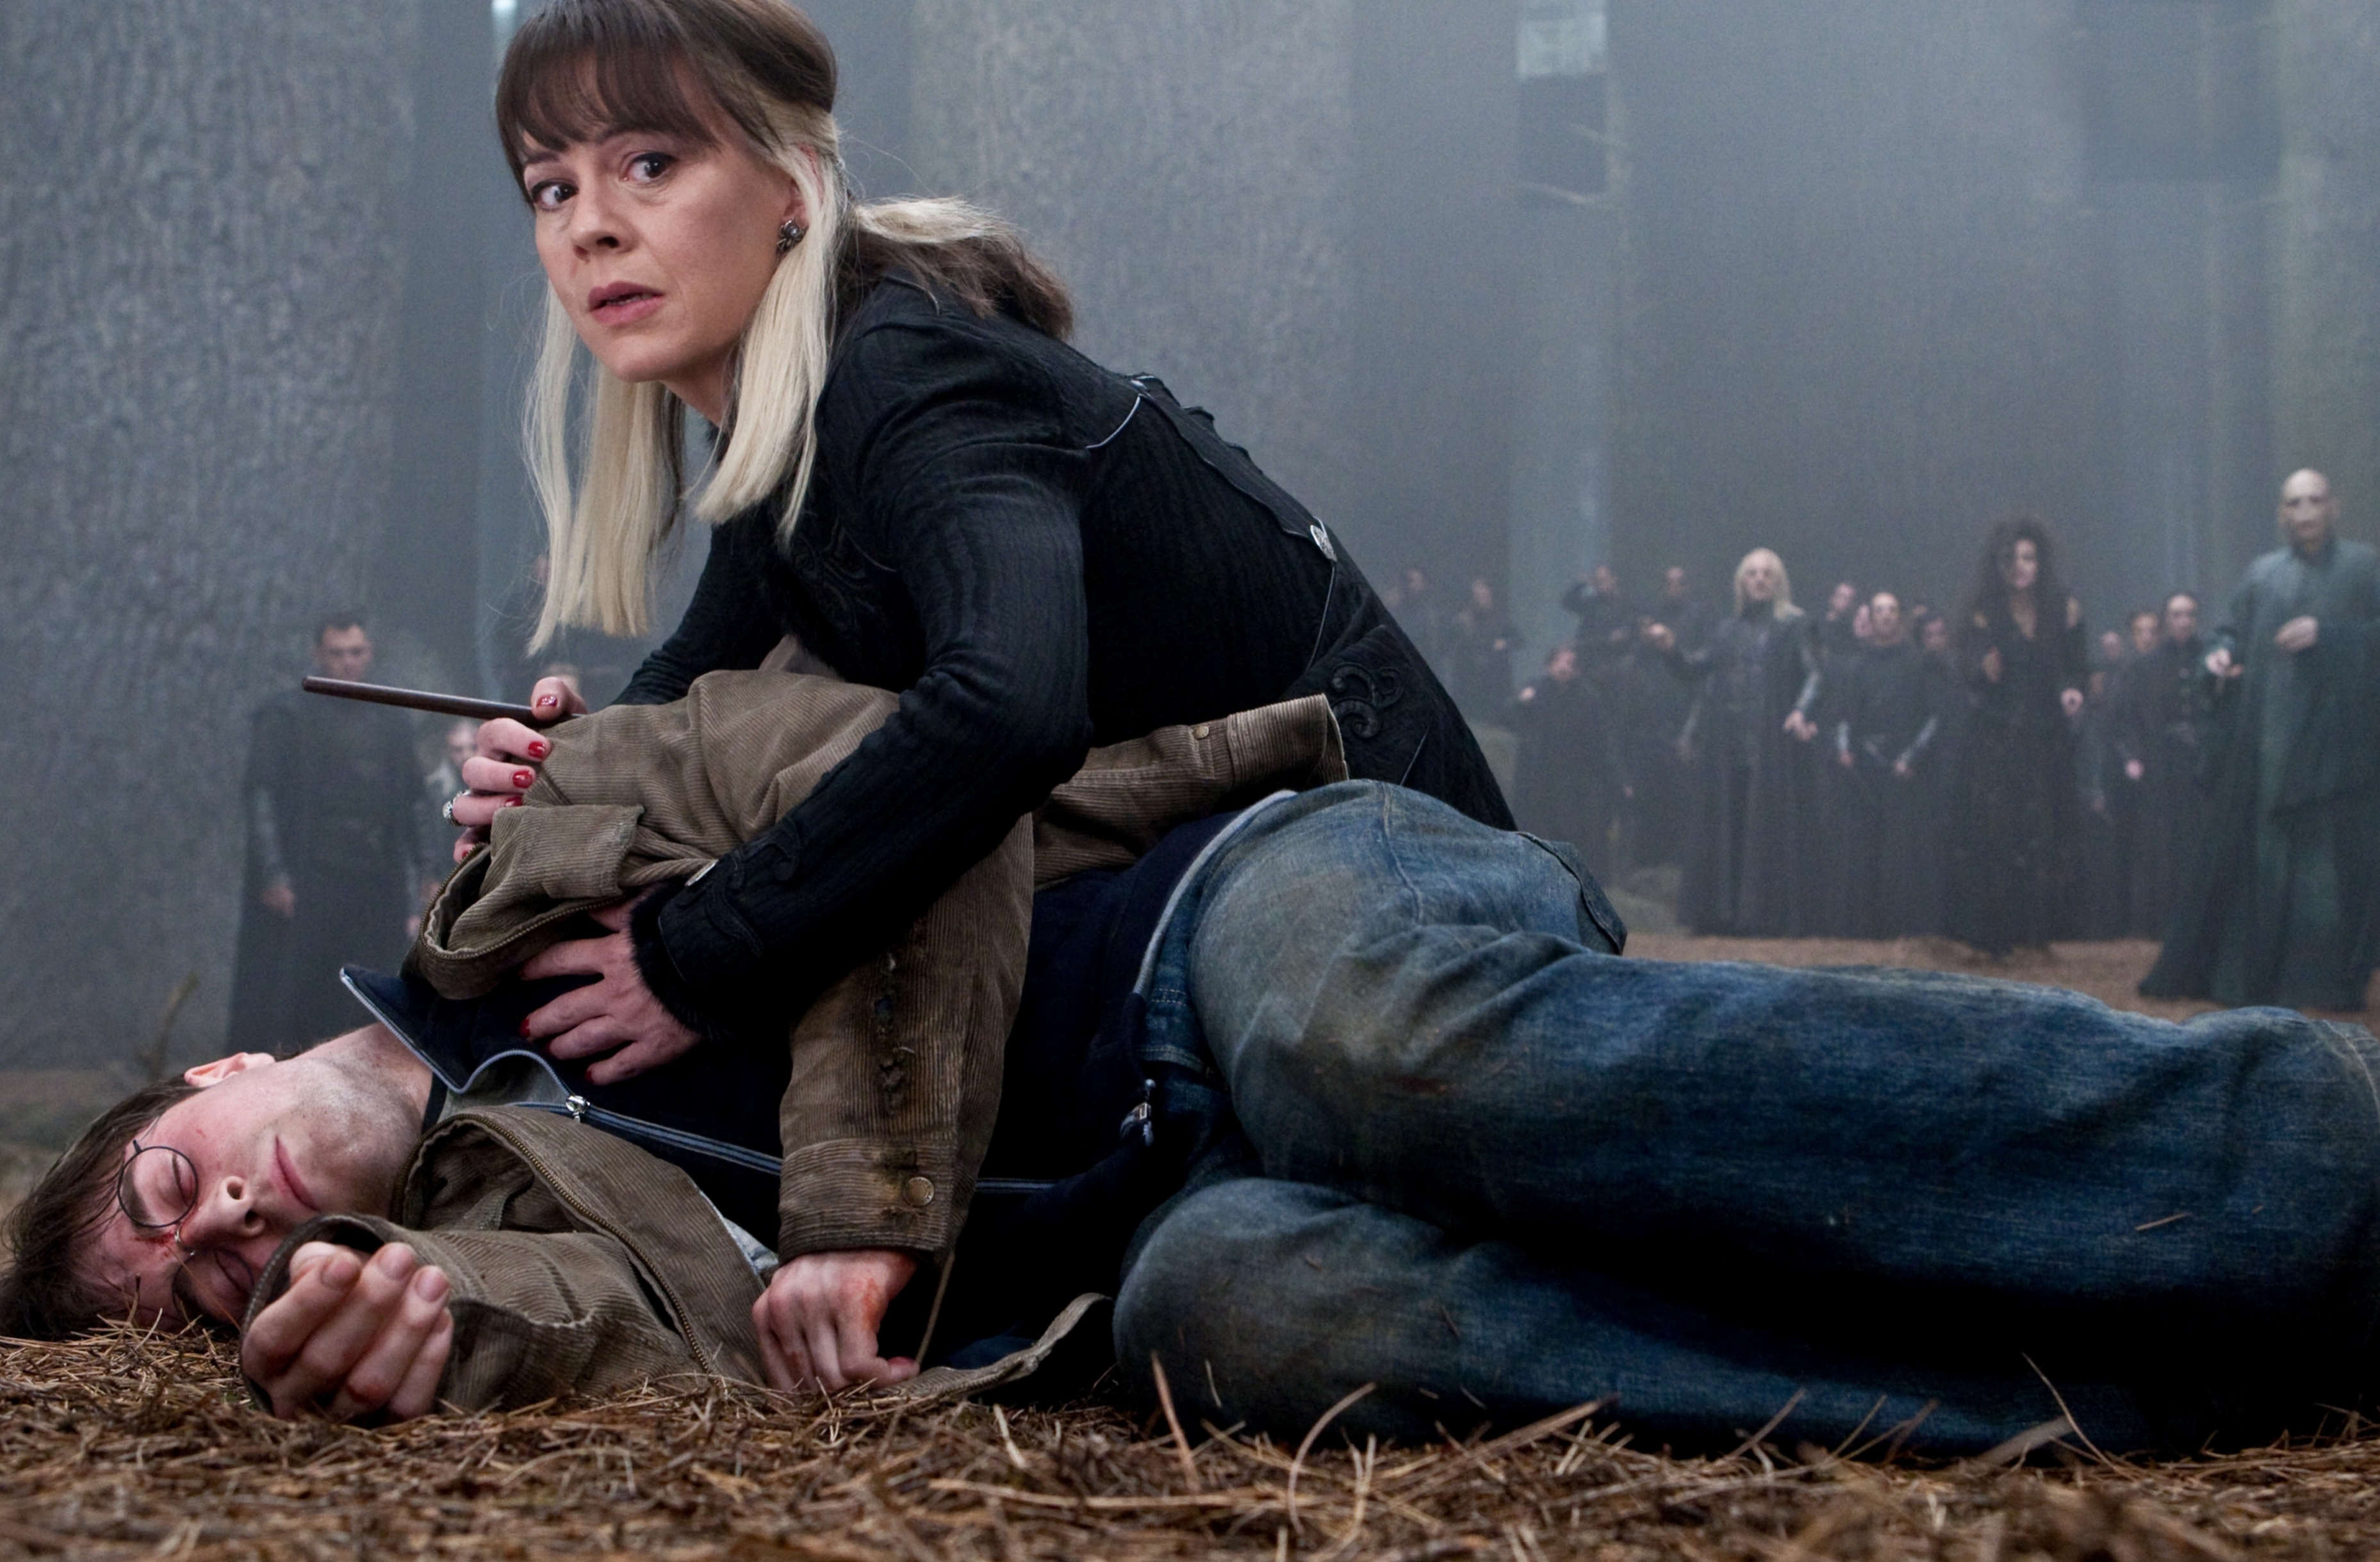 Narcissa Malfoy crouching next to Harry's dead body.